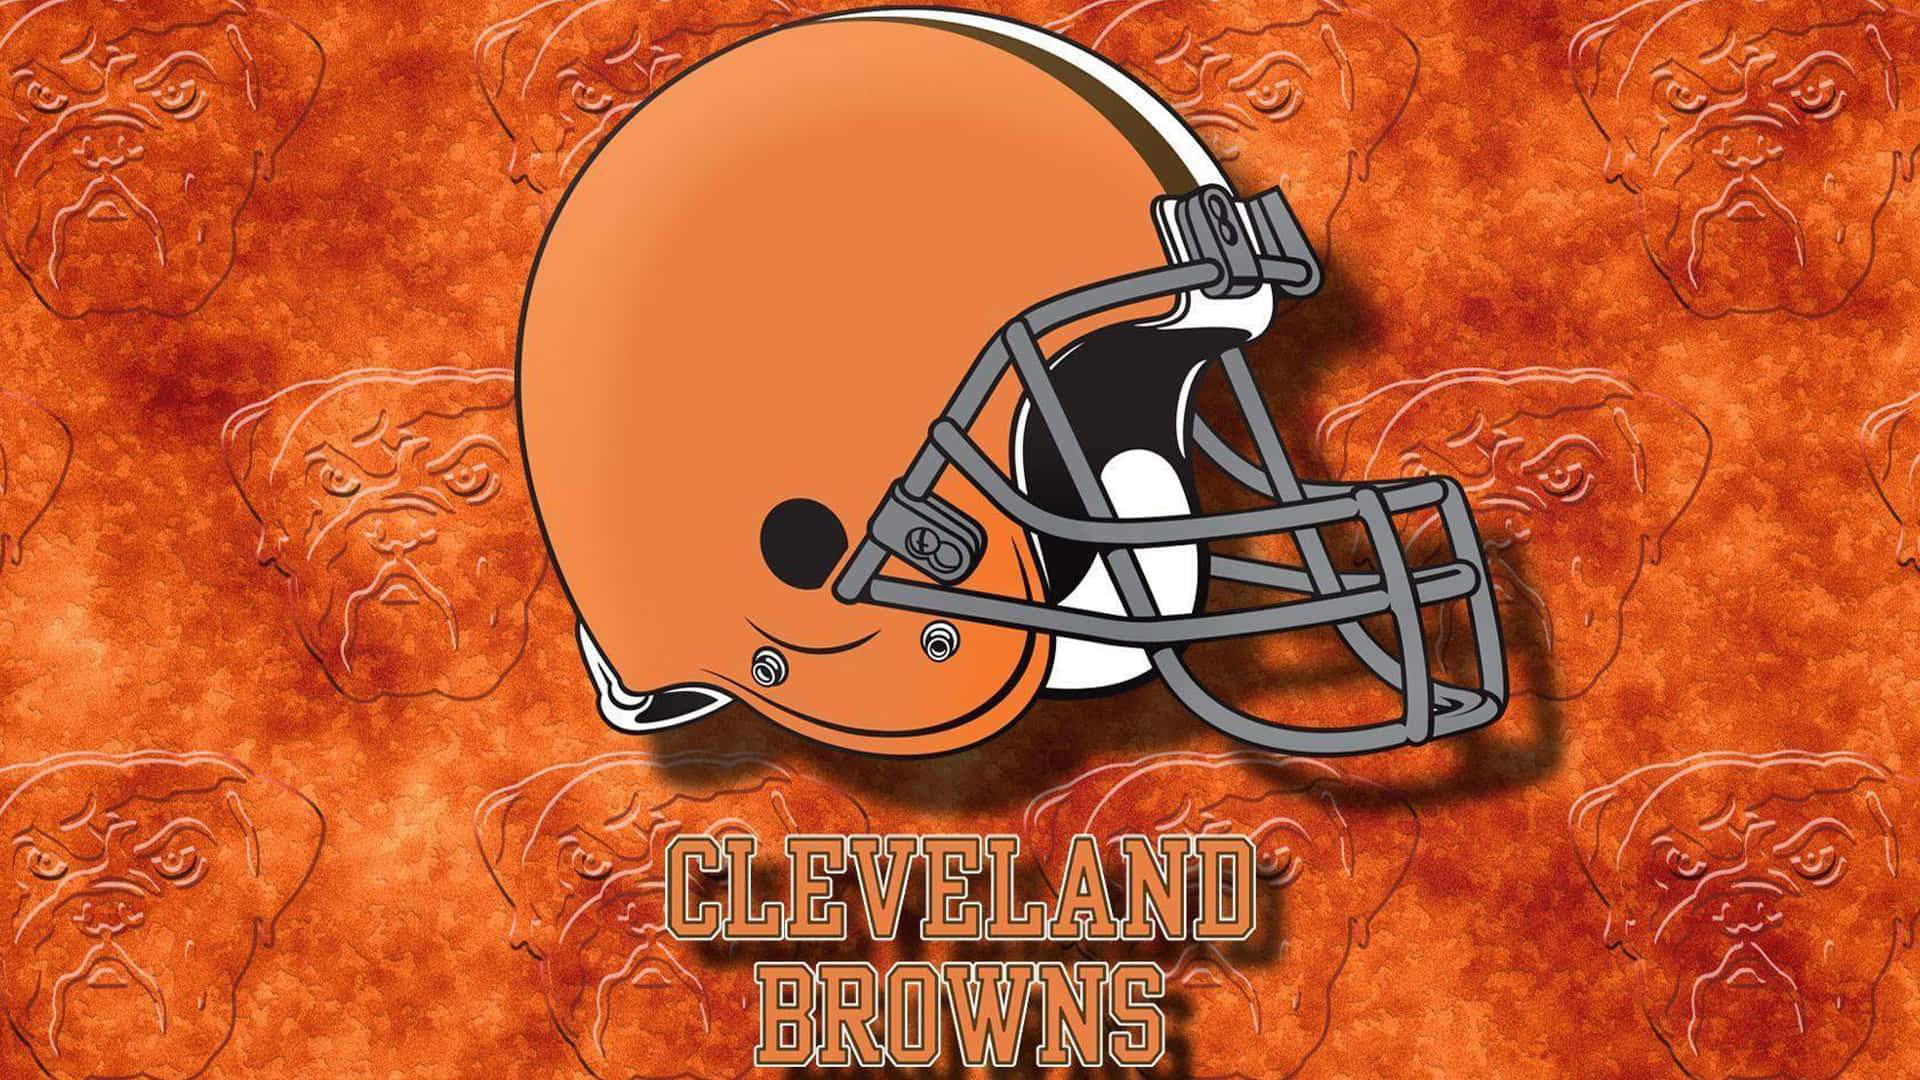 The Cleveland Browns Logo. Wallpaper